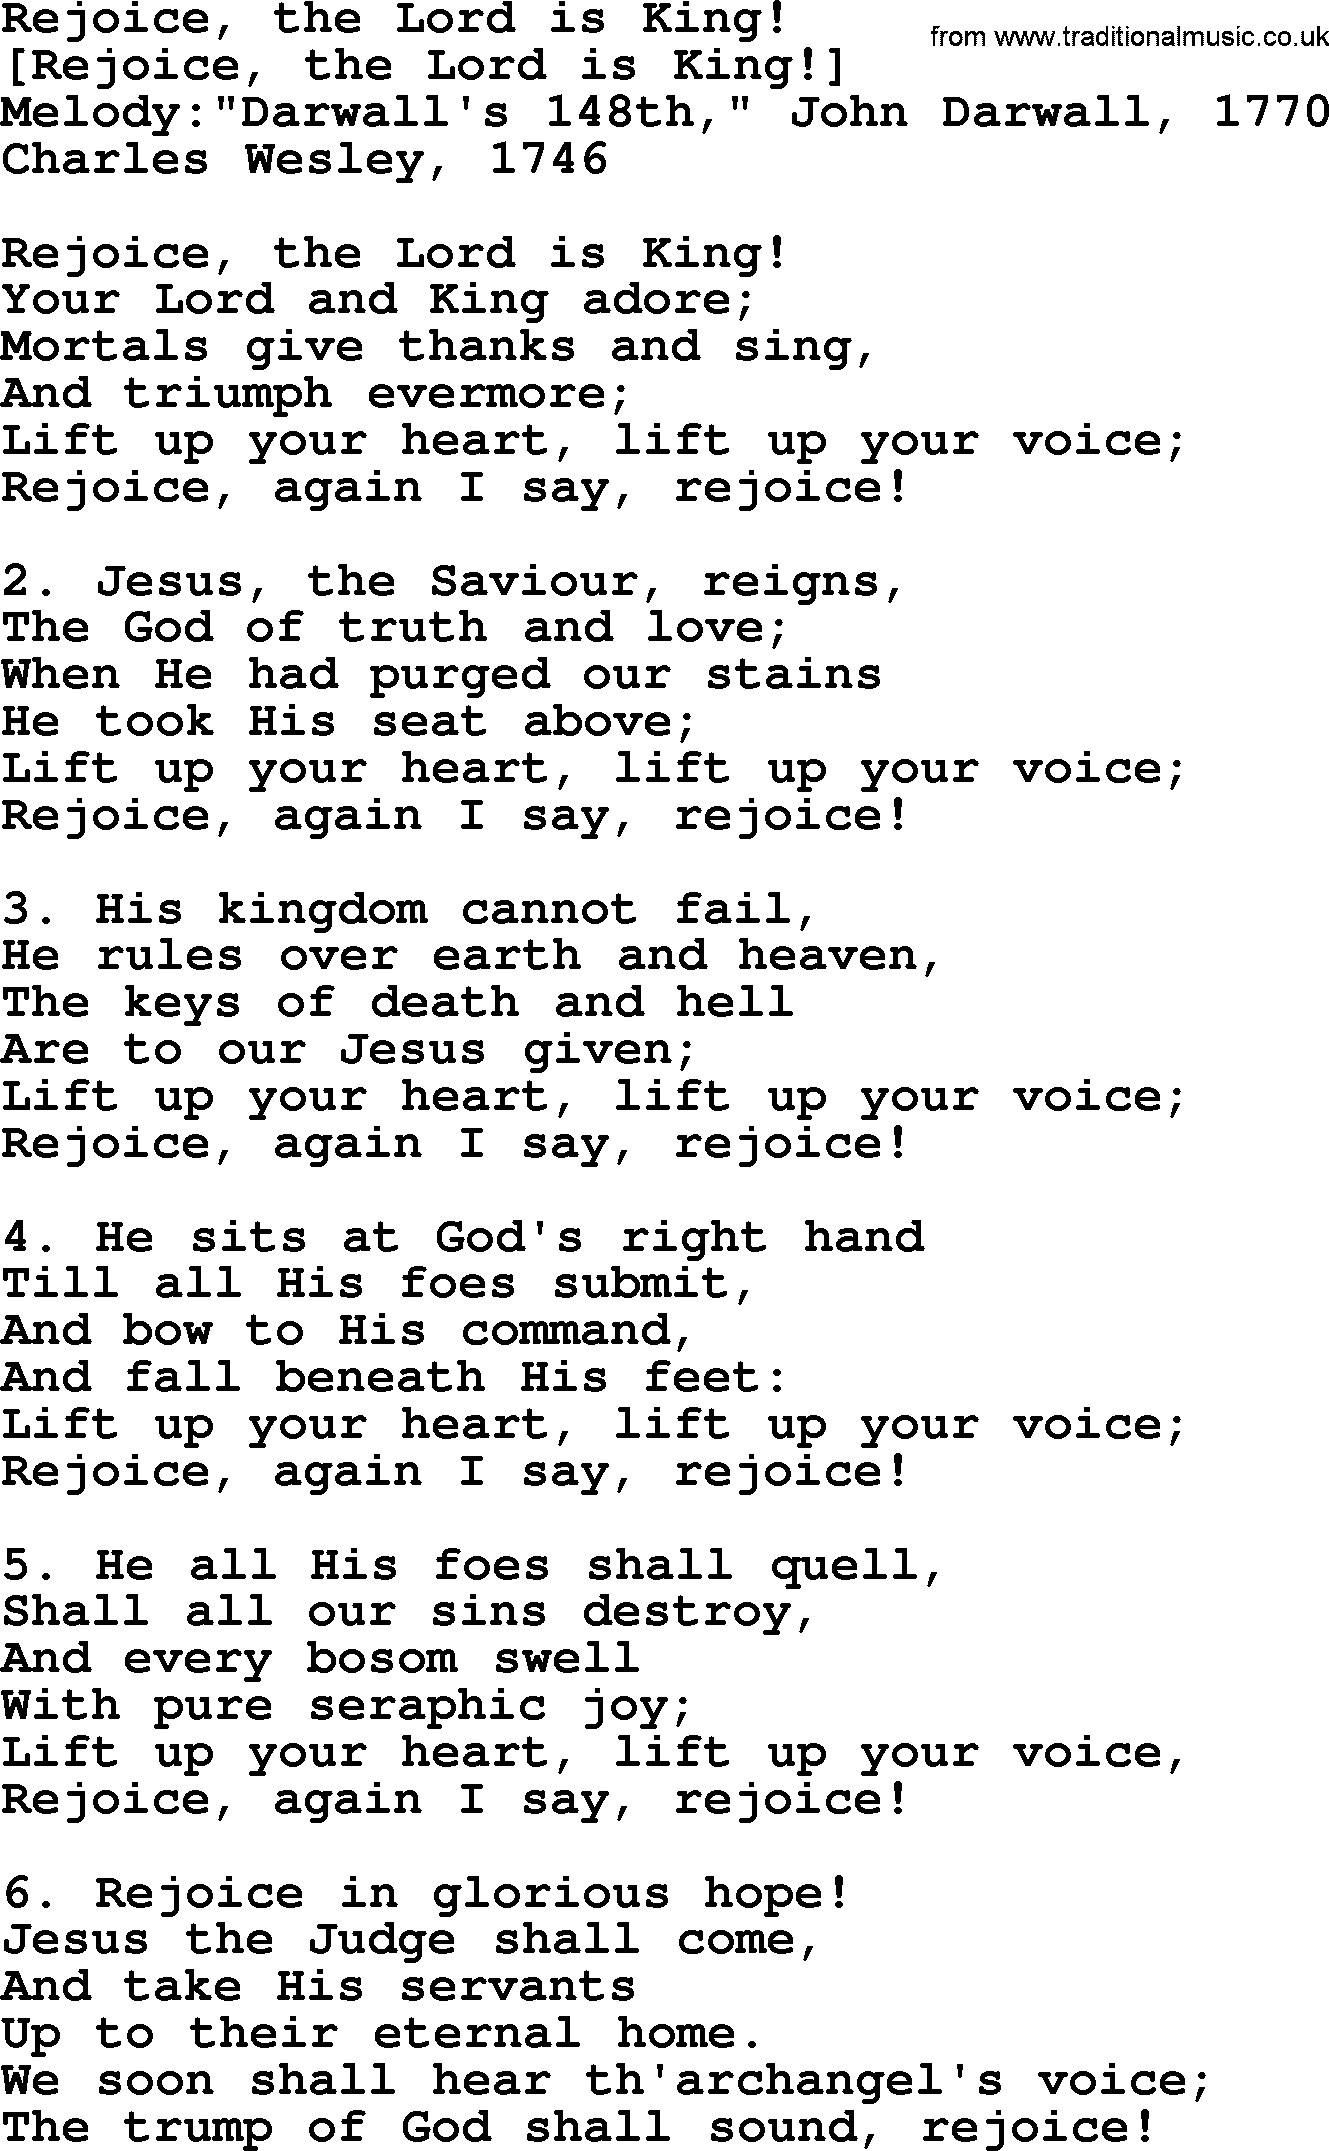 Old English Song: Rejoice, The Lord Is King! lyrics